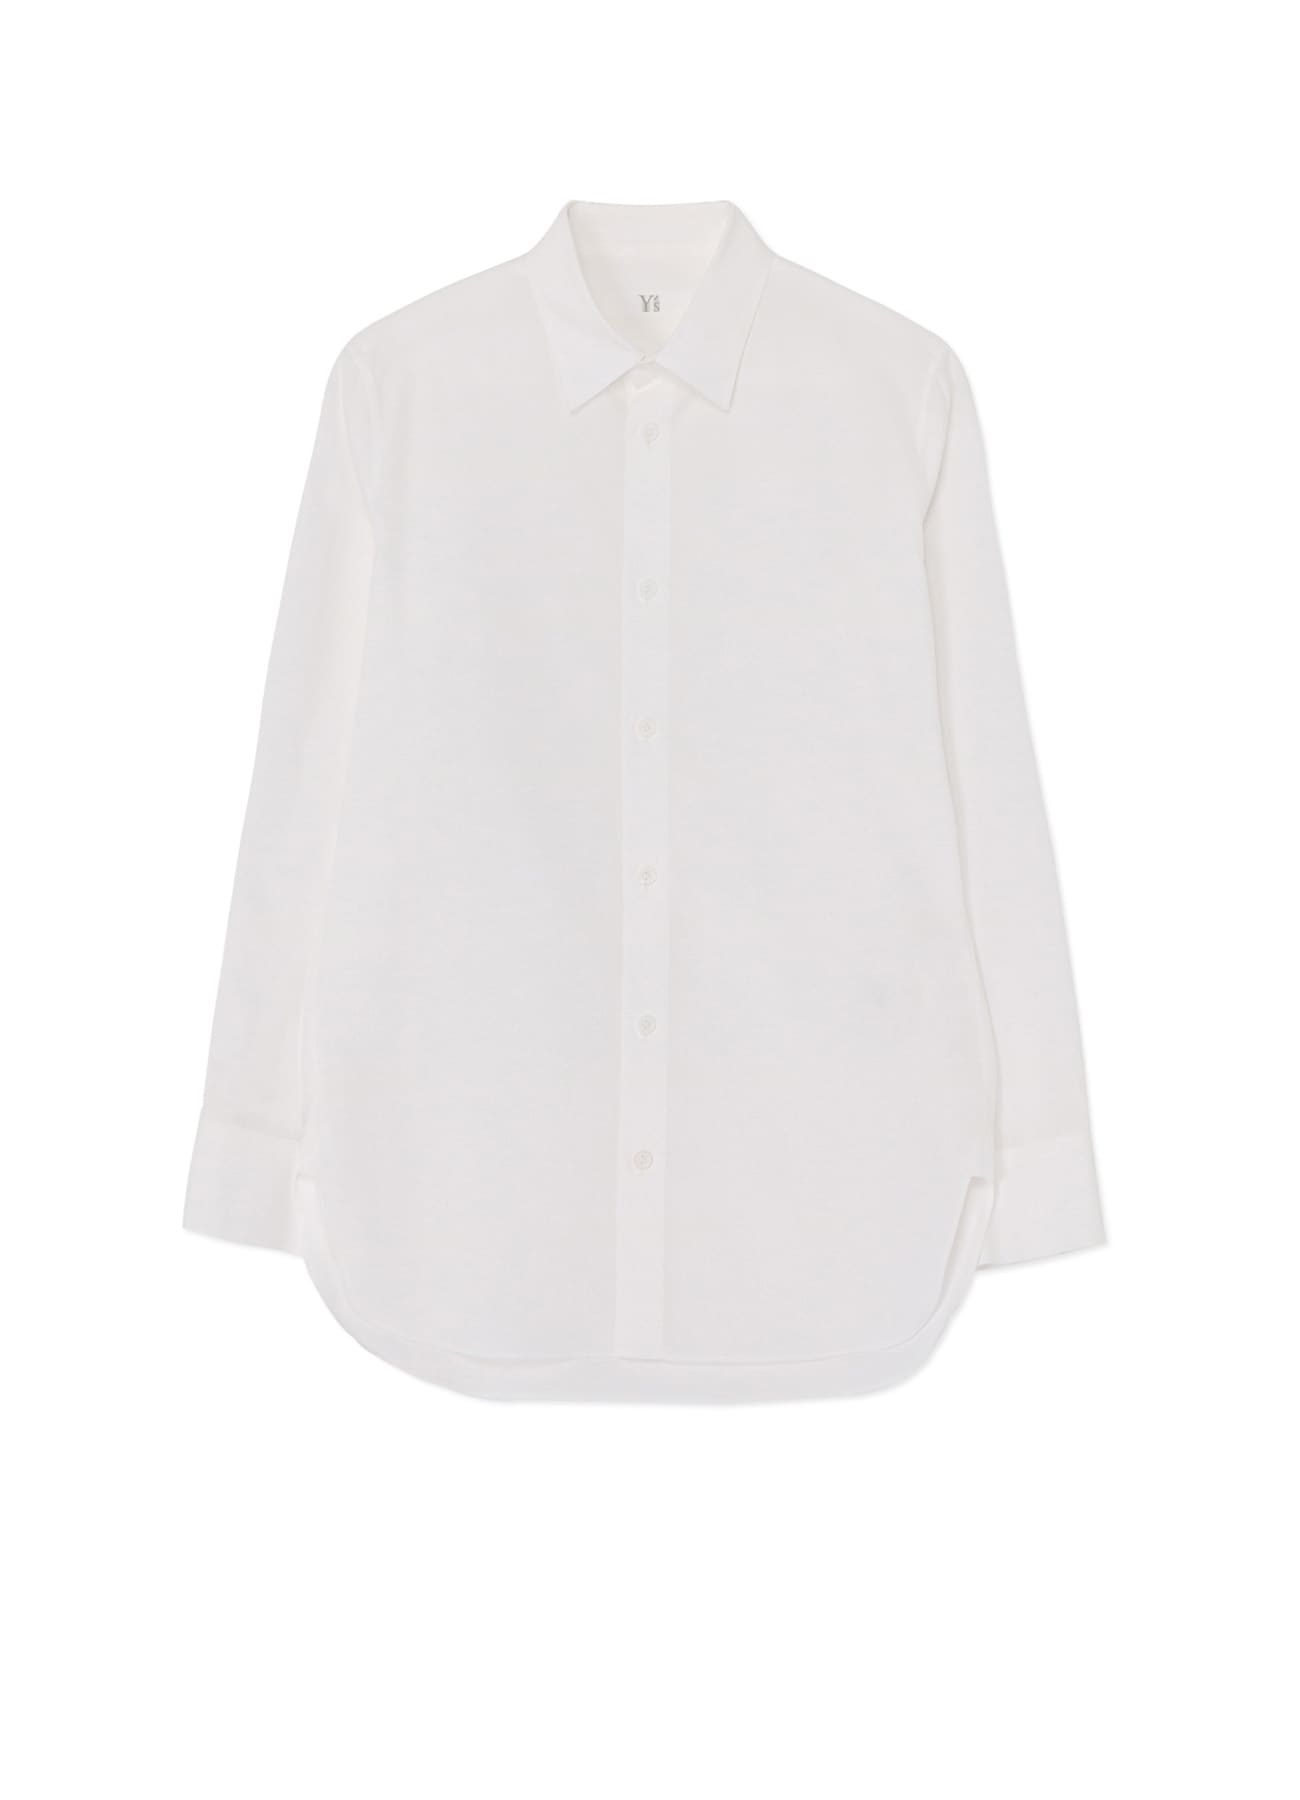 COTTON BROADCLOTH CLASSIC SHIRT(XS White): Y's｜THE SHOP